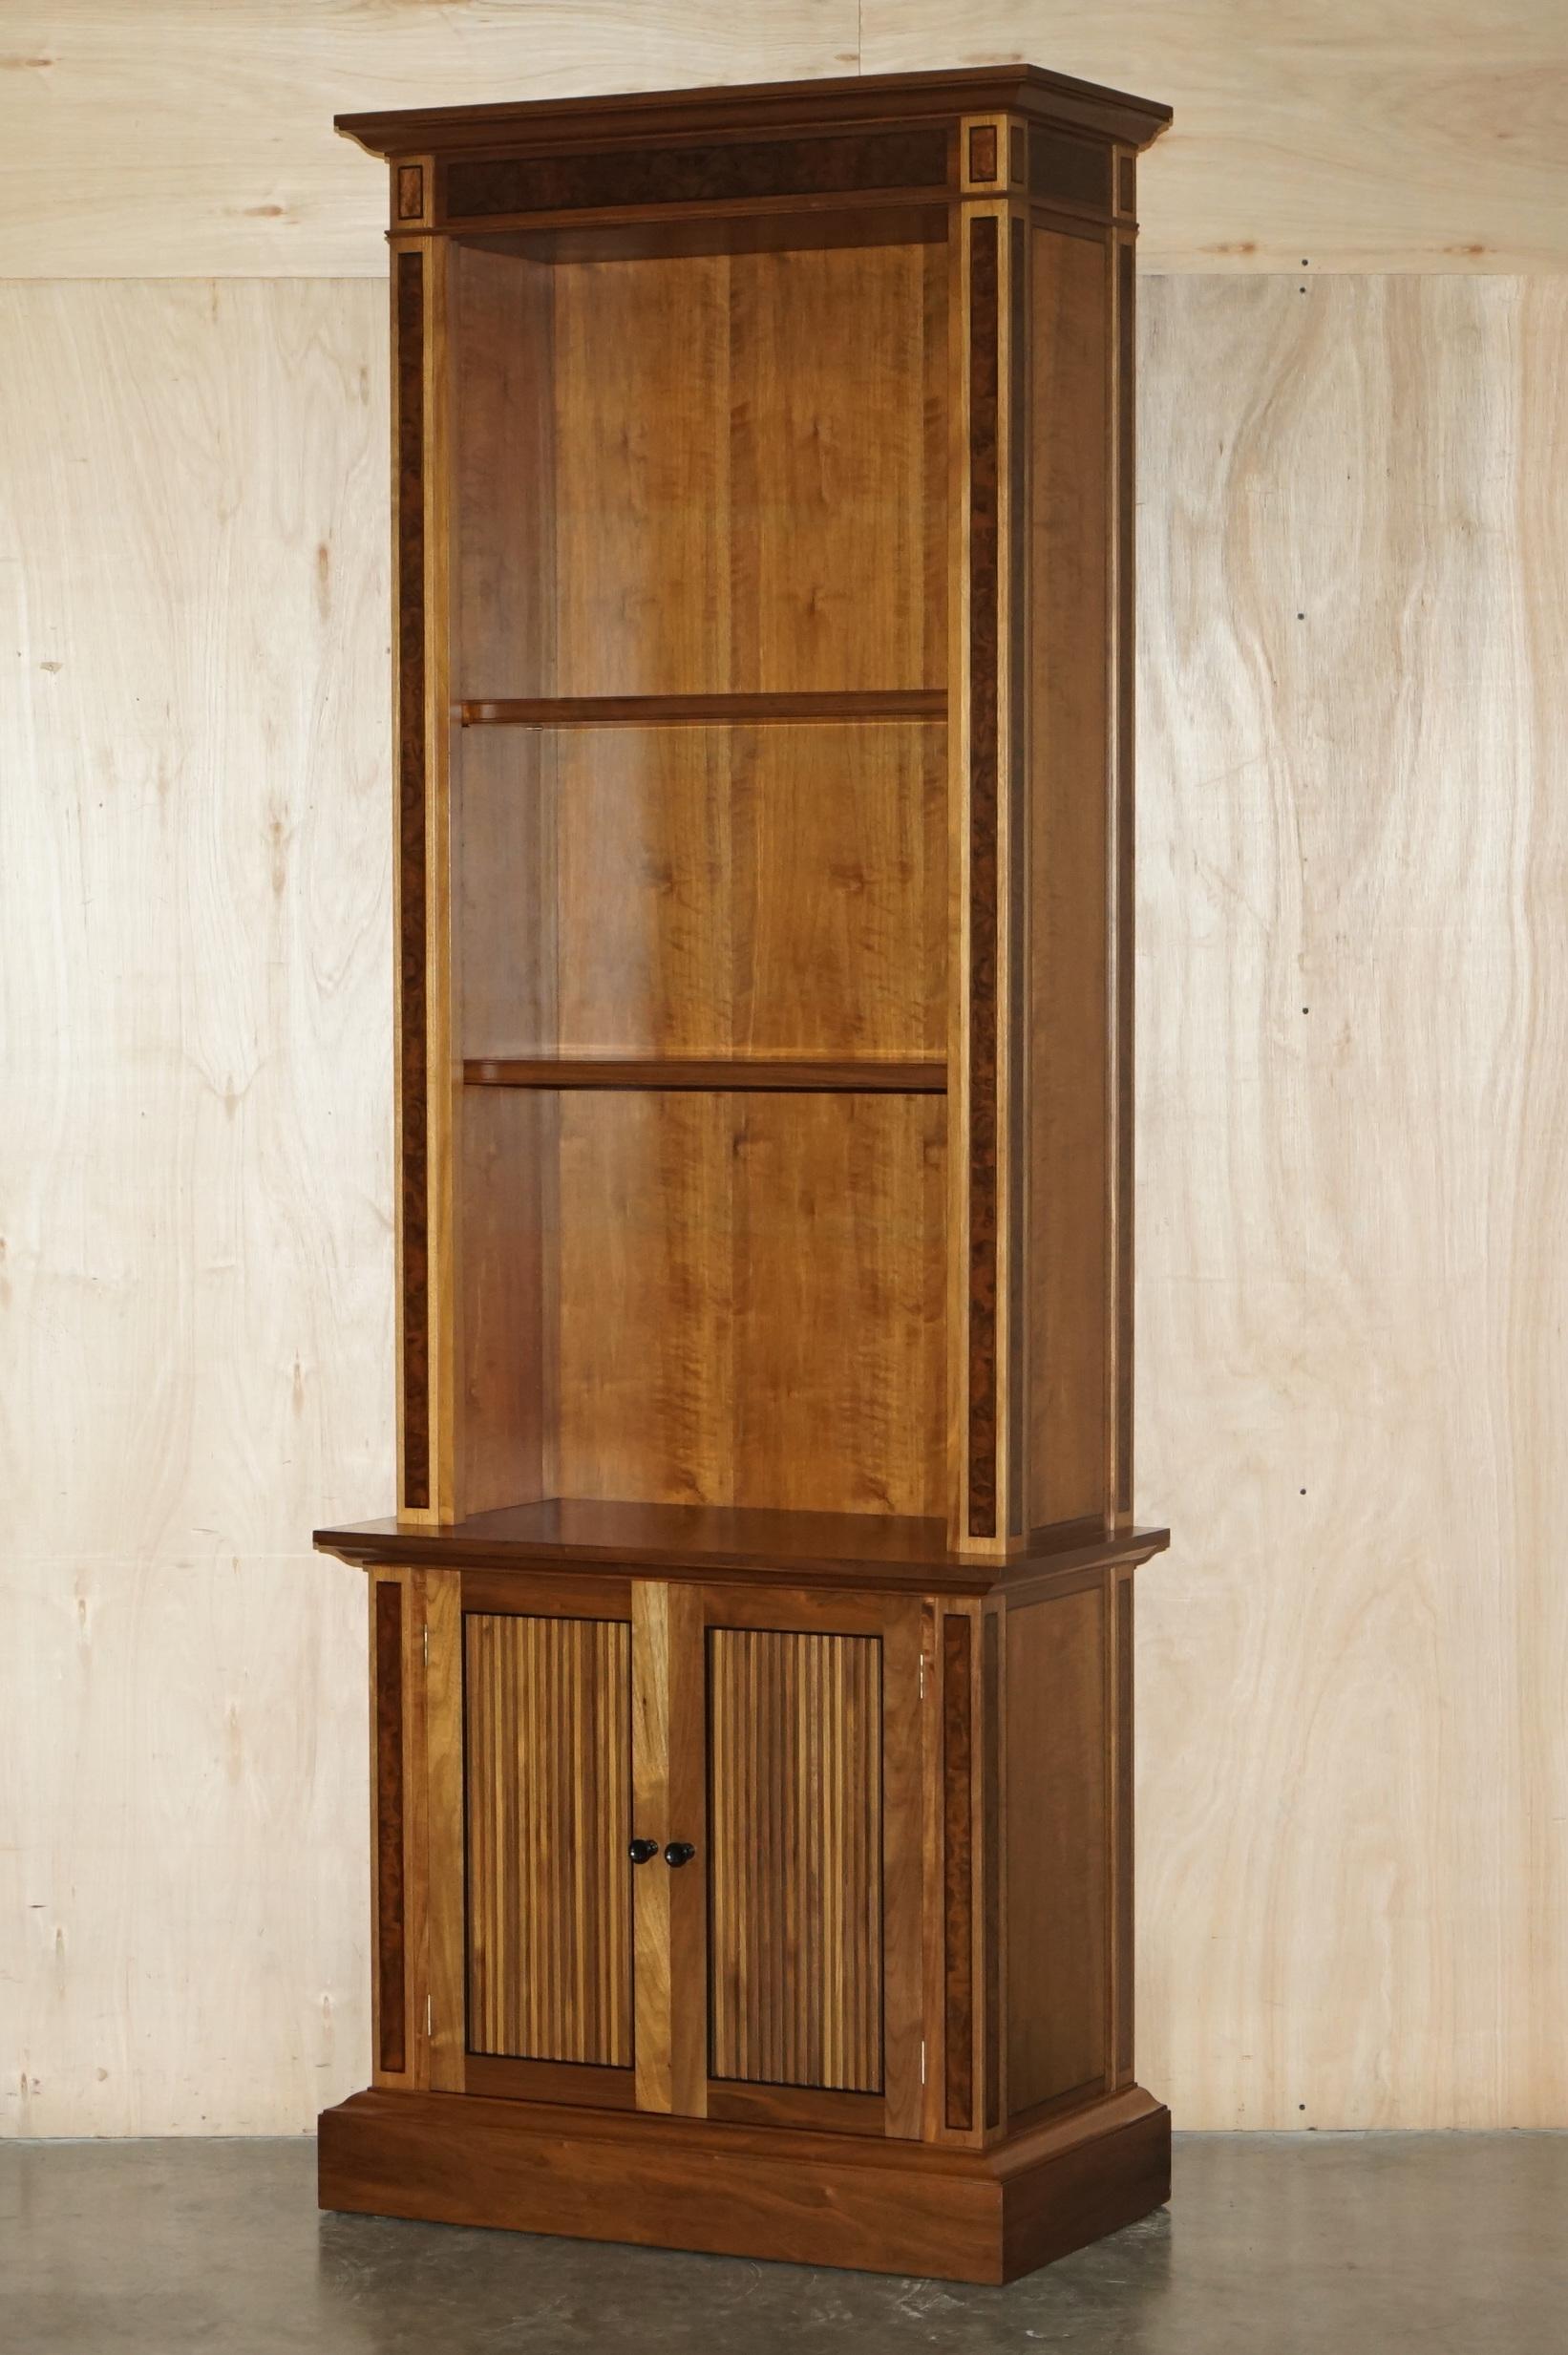 Royal House Antiques

Royal House Antiques is delighted to offer for sale this stunning pair of very tall Viscount David Linley Burr Walnut library bookcases which are part of a suite

Please note the delivery fee listed is just a guide, it covers